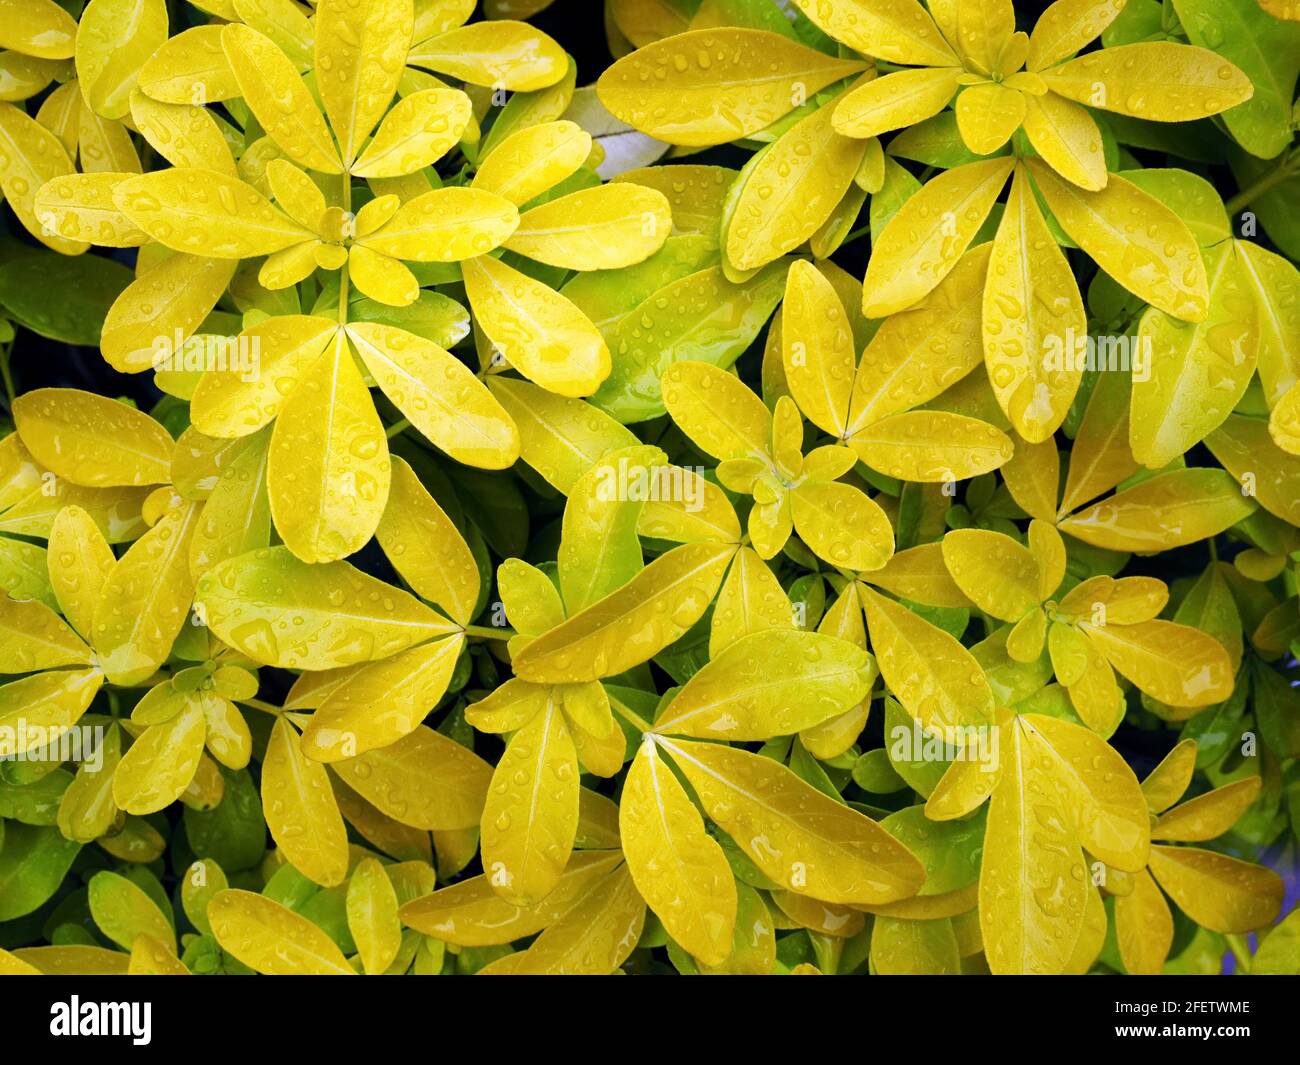 Shrub with yellow leaves Stock Photo